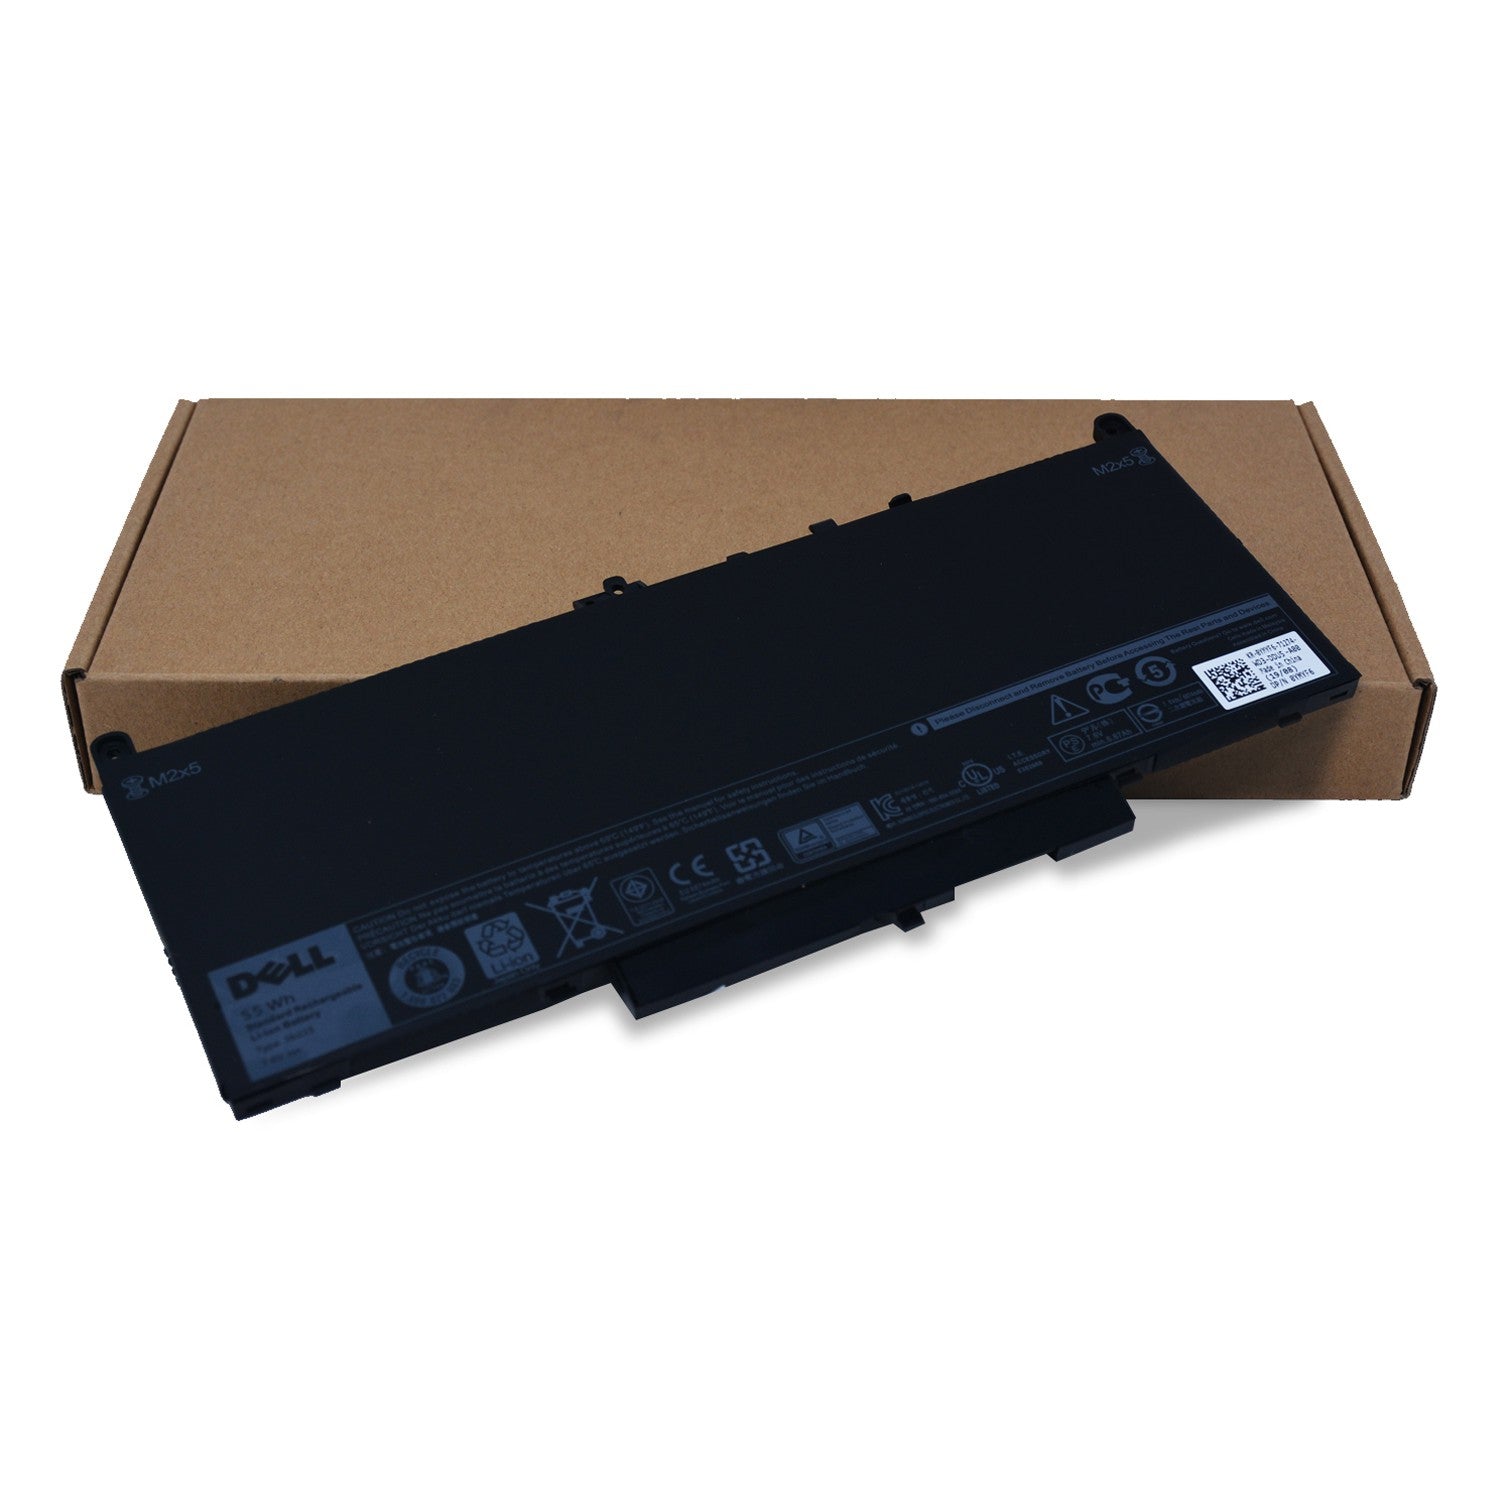 New Replacement Laptop battery for Dell Latitude E7470, E7270 Type J60J5 MC34Y (7300mAh/55Wh , 4- Cells, 7.6V), 1 Year Warranty